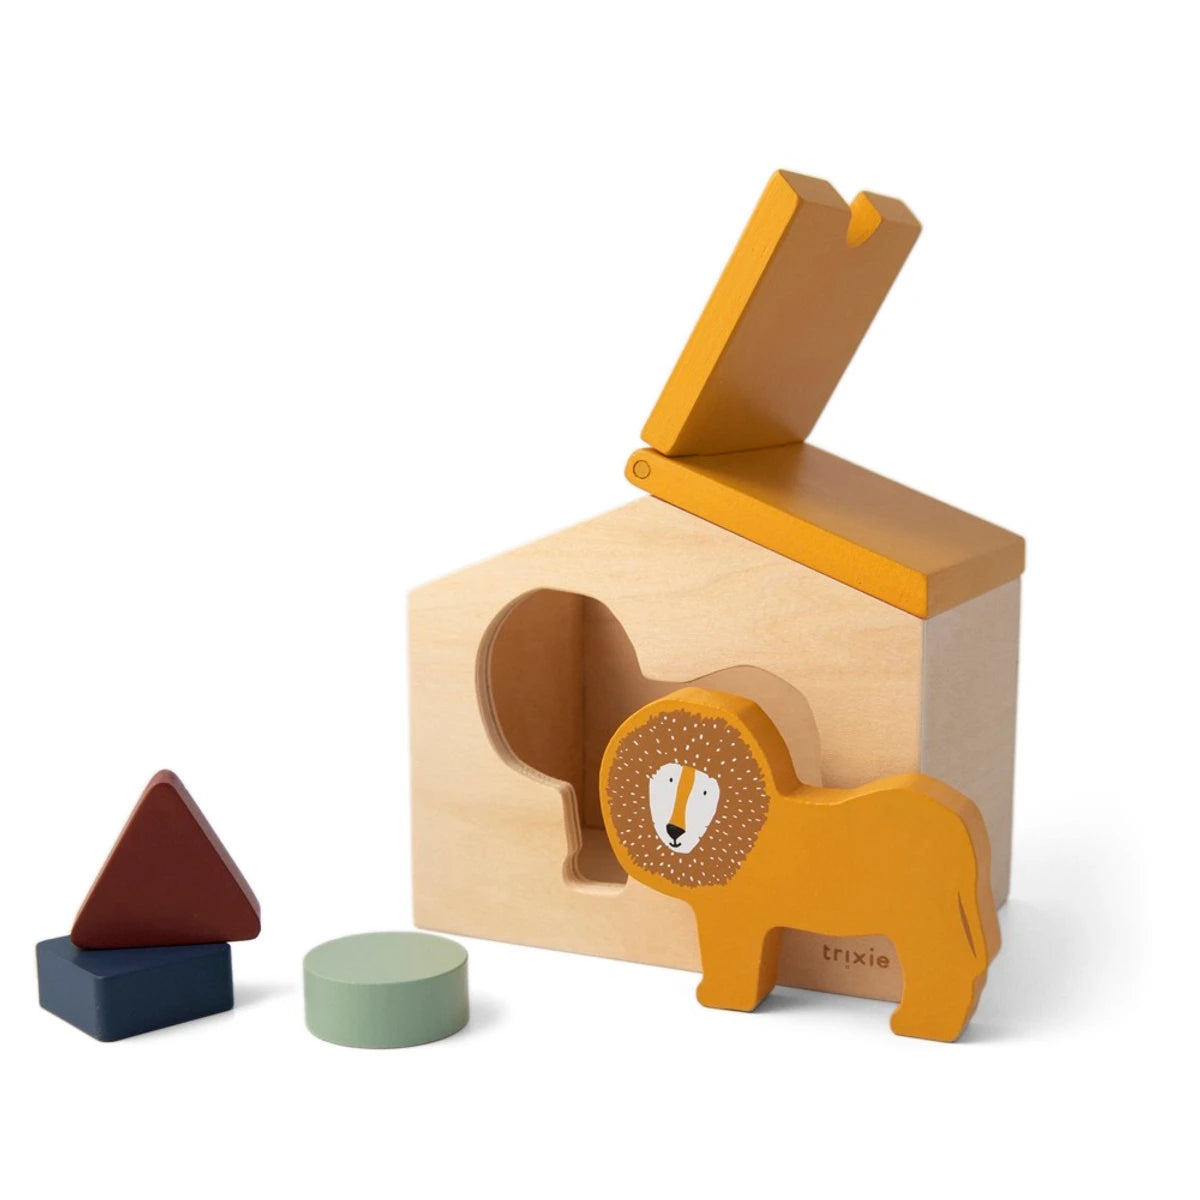 An image of Kids Wooden House - Children's Wooden House - Wooden Toys | Trixie Mr. Lion